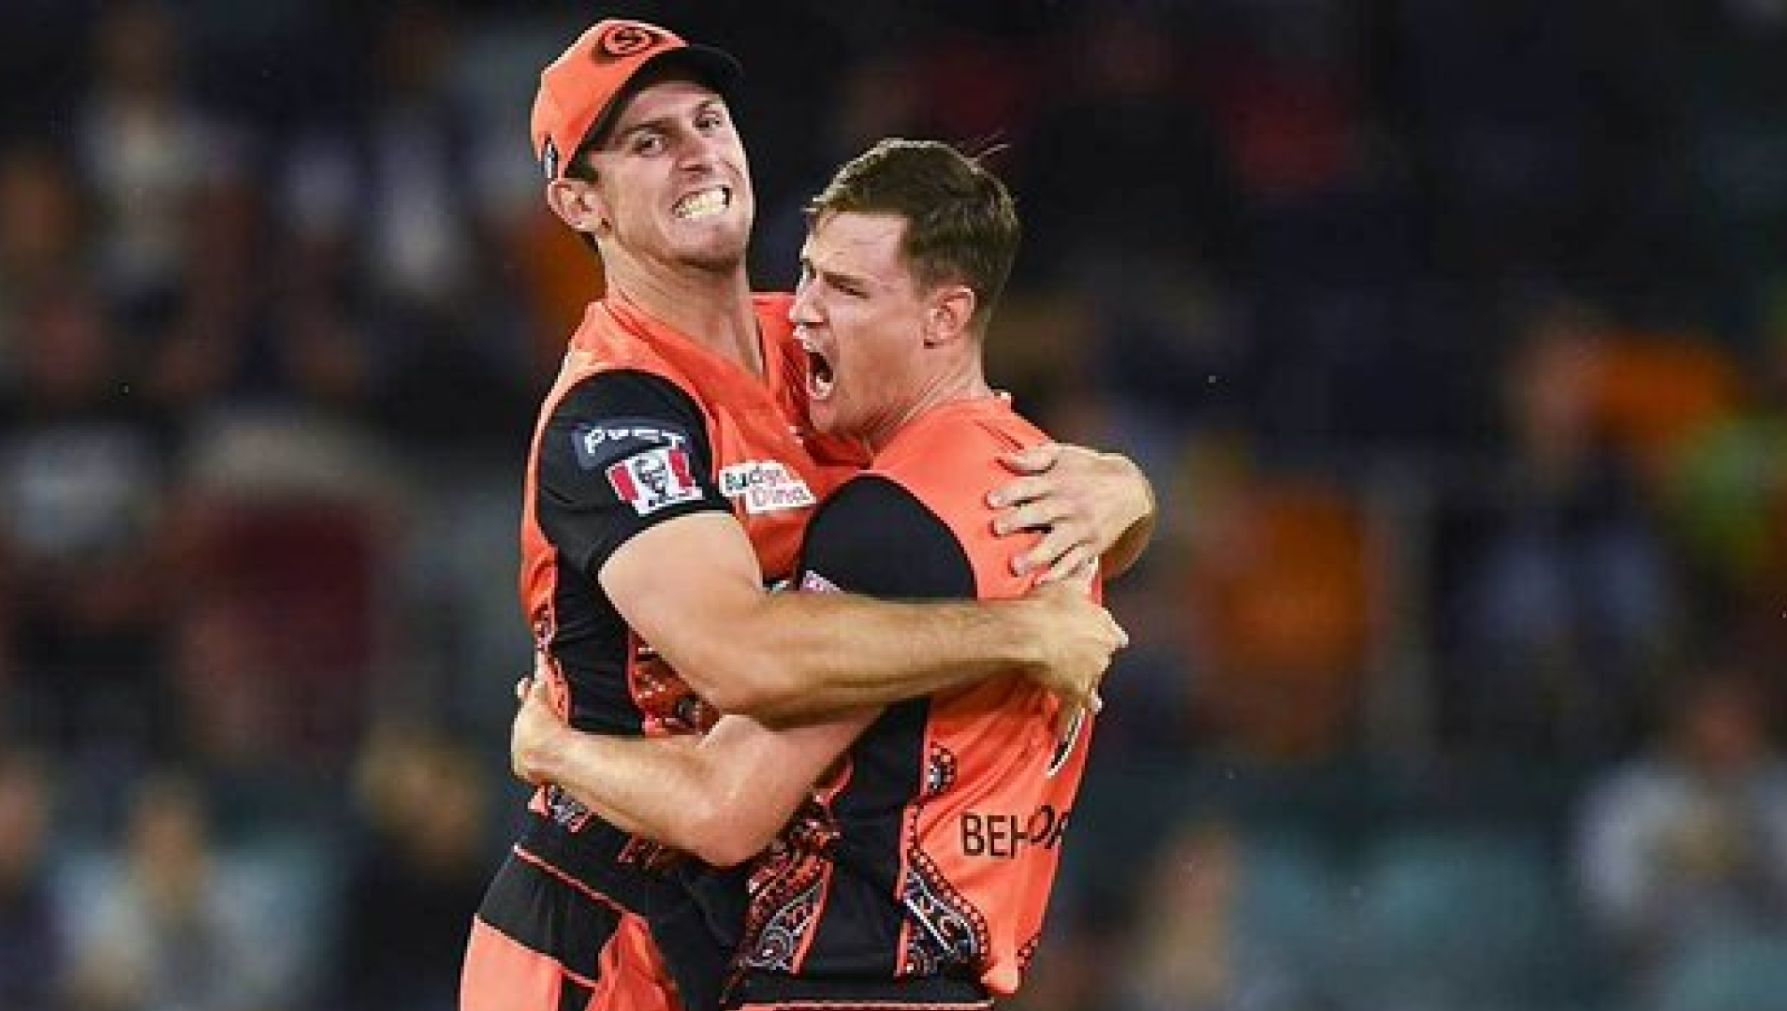 Started from the bottom now we're here: Scorchers roll over Heat to reach BBL finals